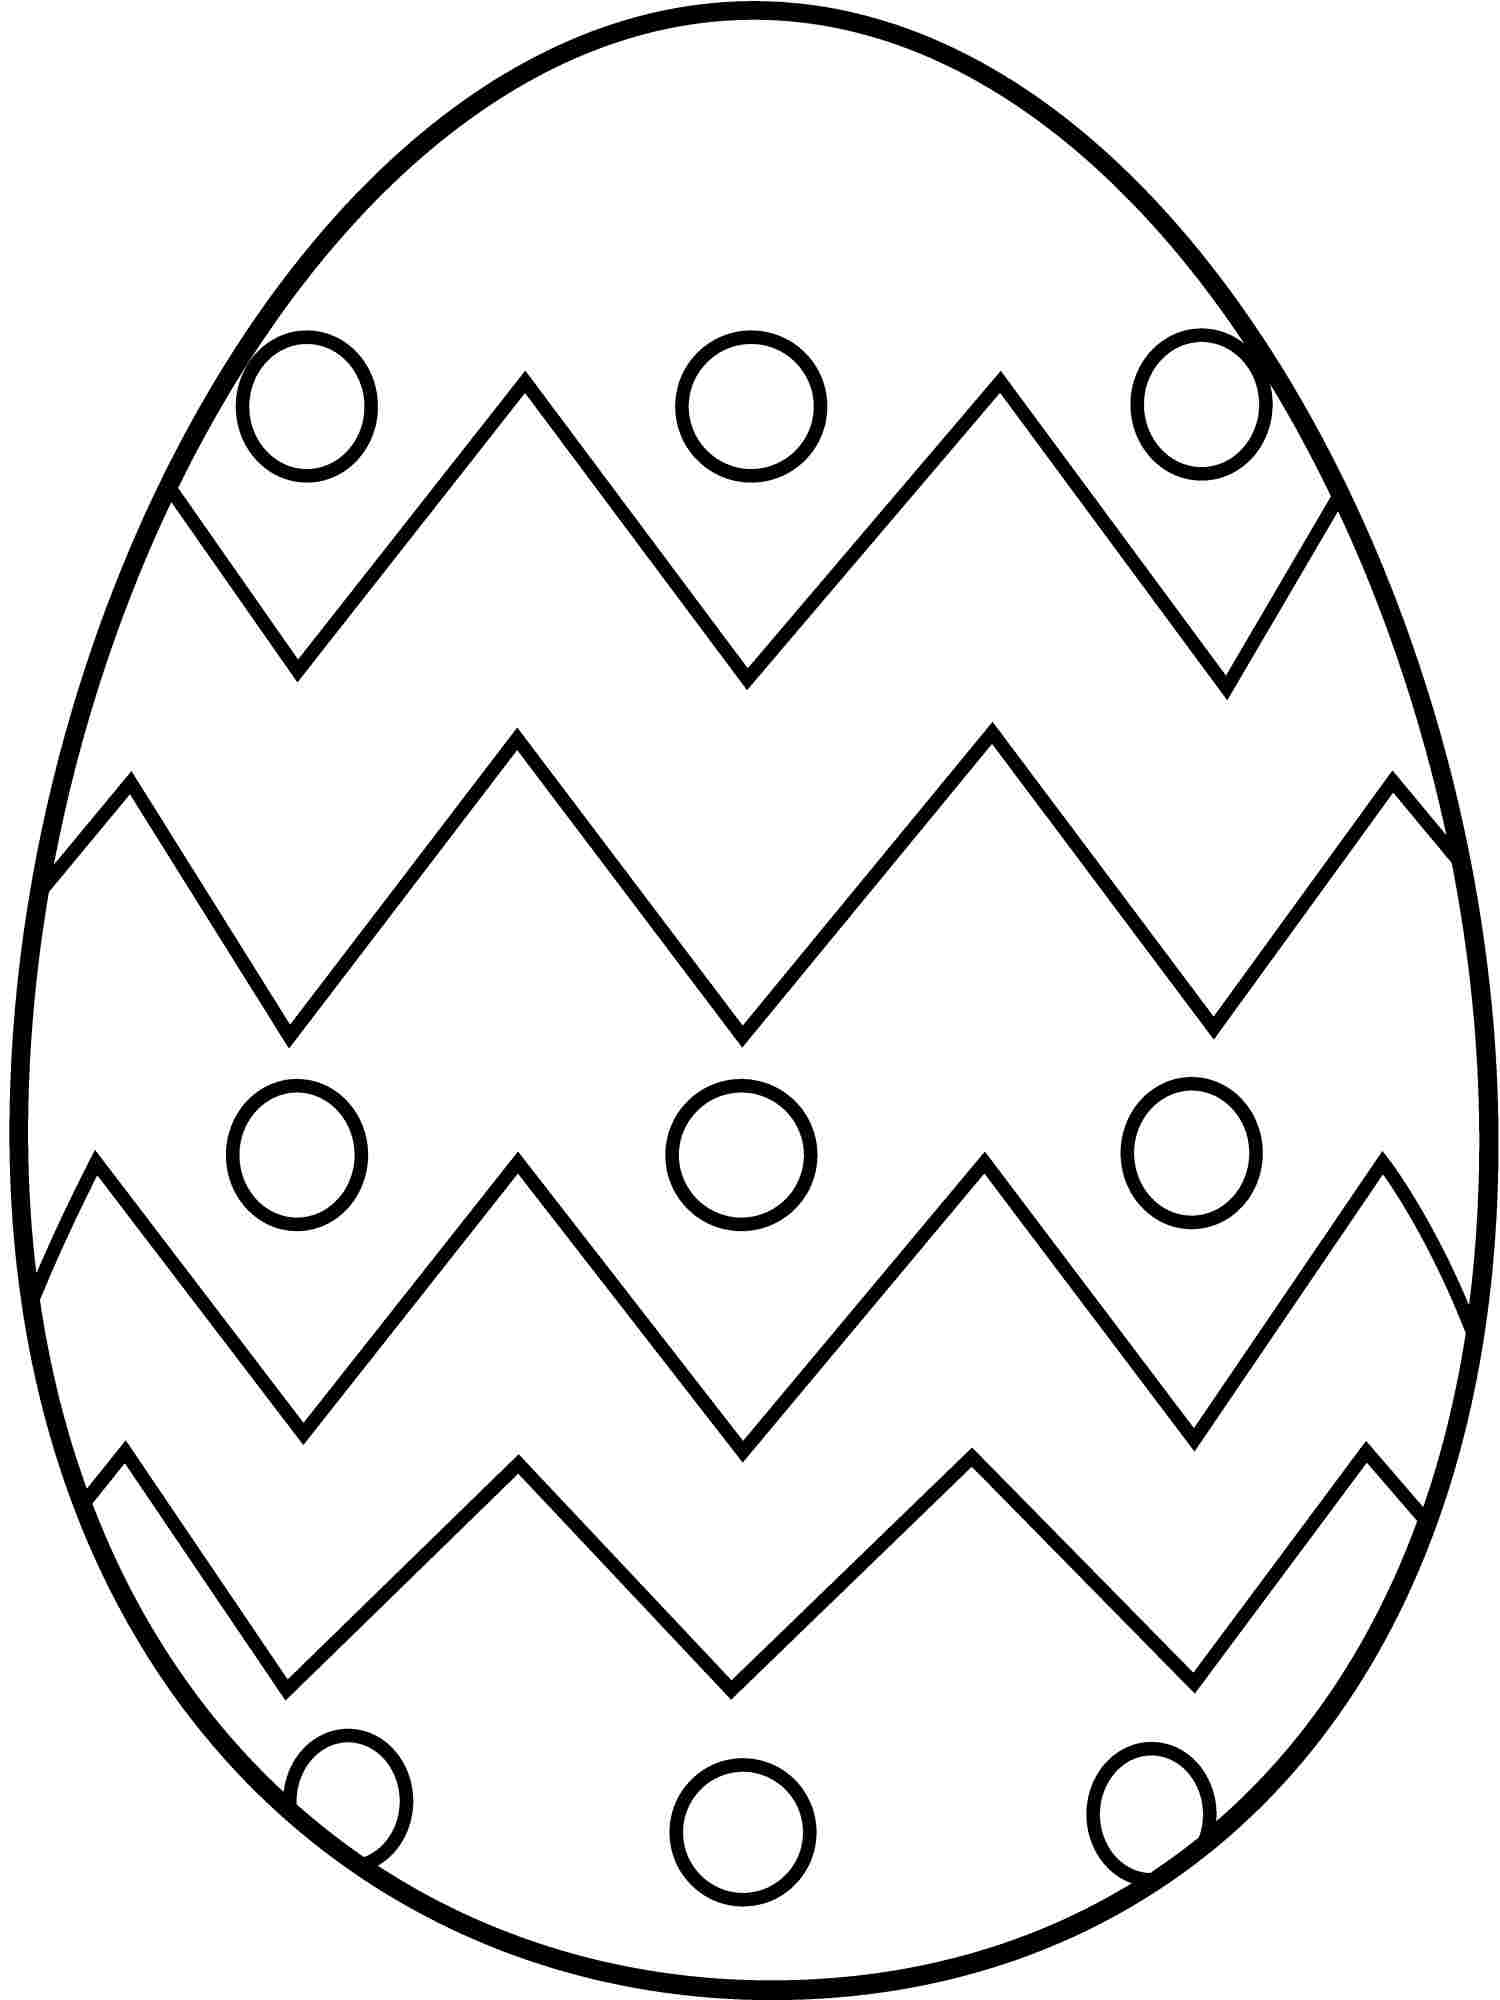 Large Easter Egg Coloring Pages at GetColorings com Free printable